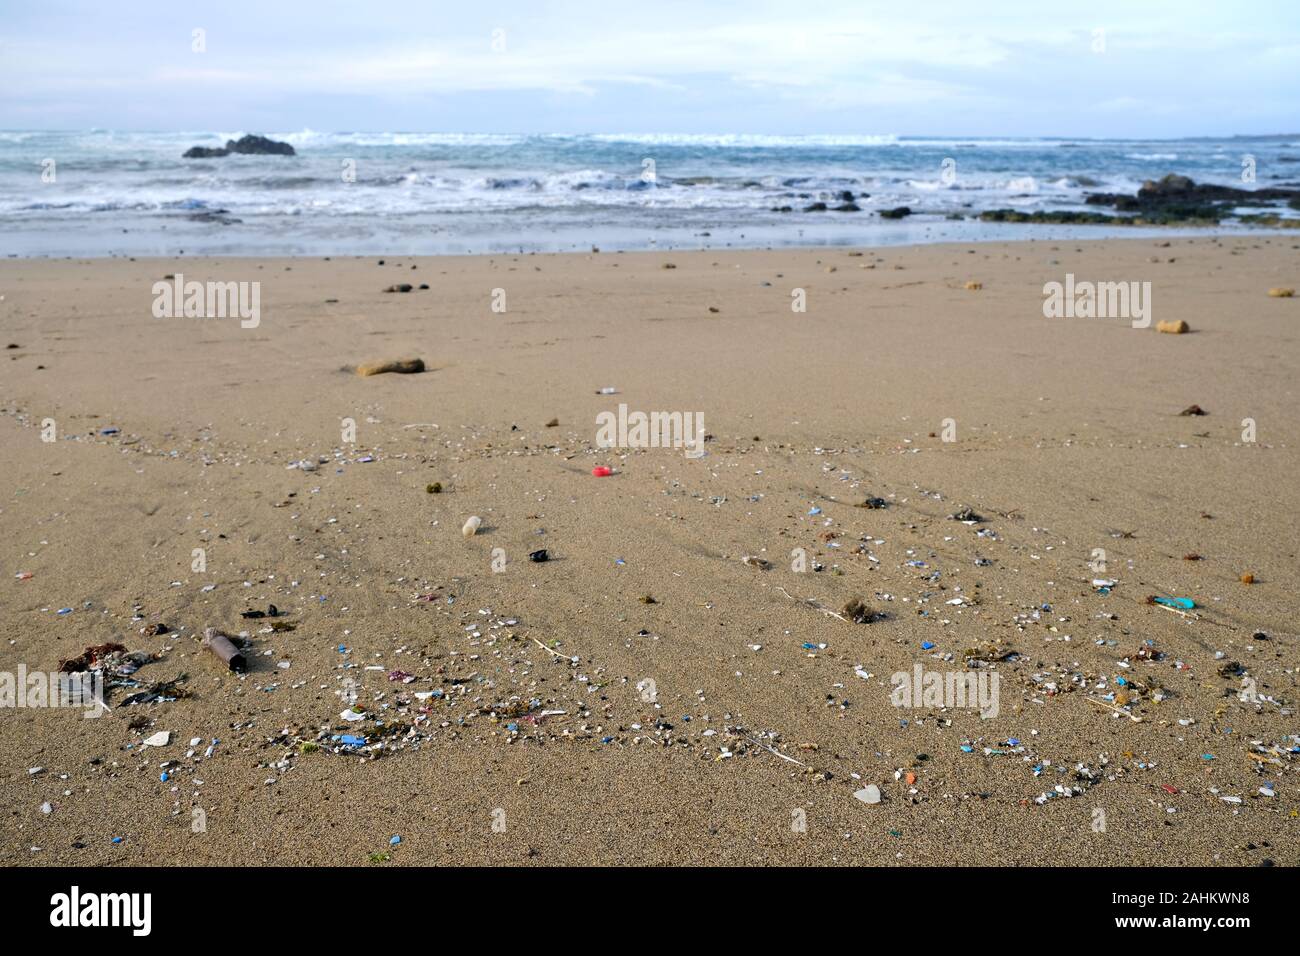 Beach polluted with microplastics, ocean waves in blurred background. Stock Photo